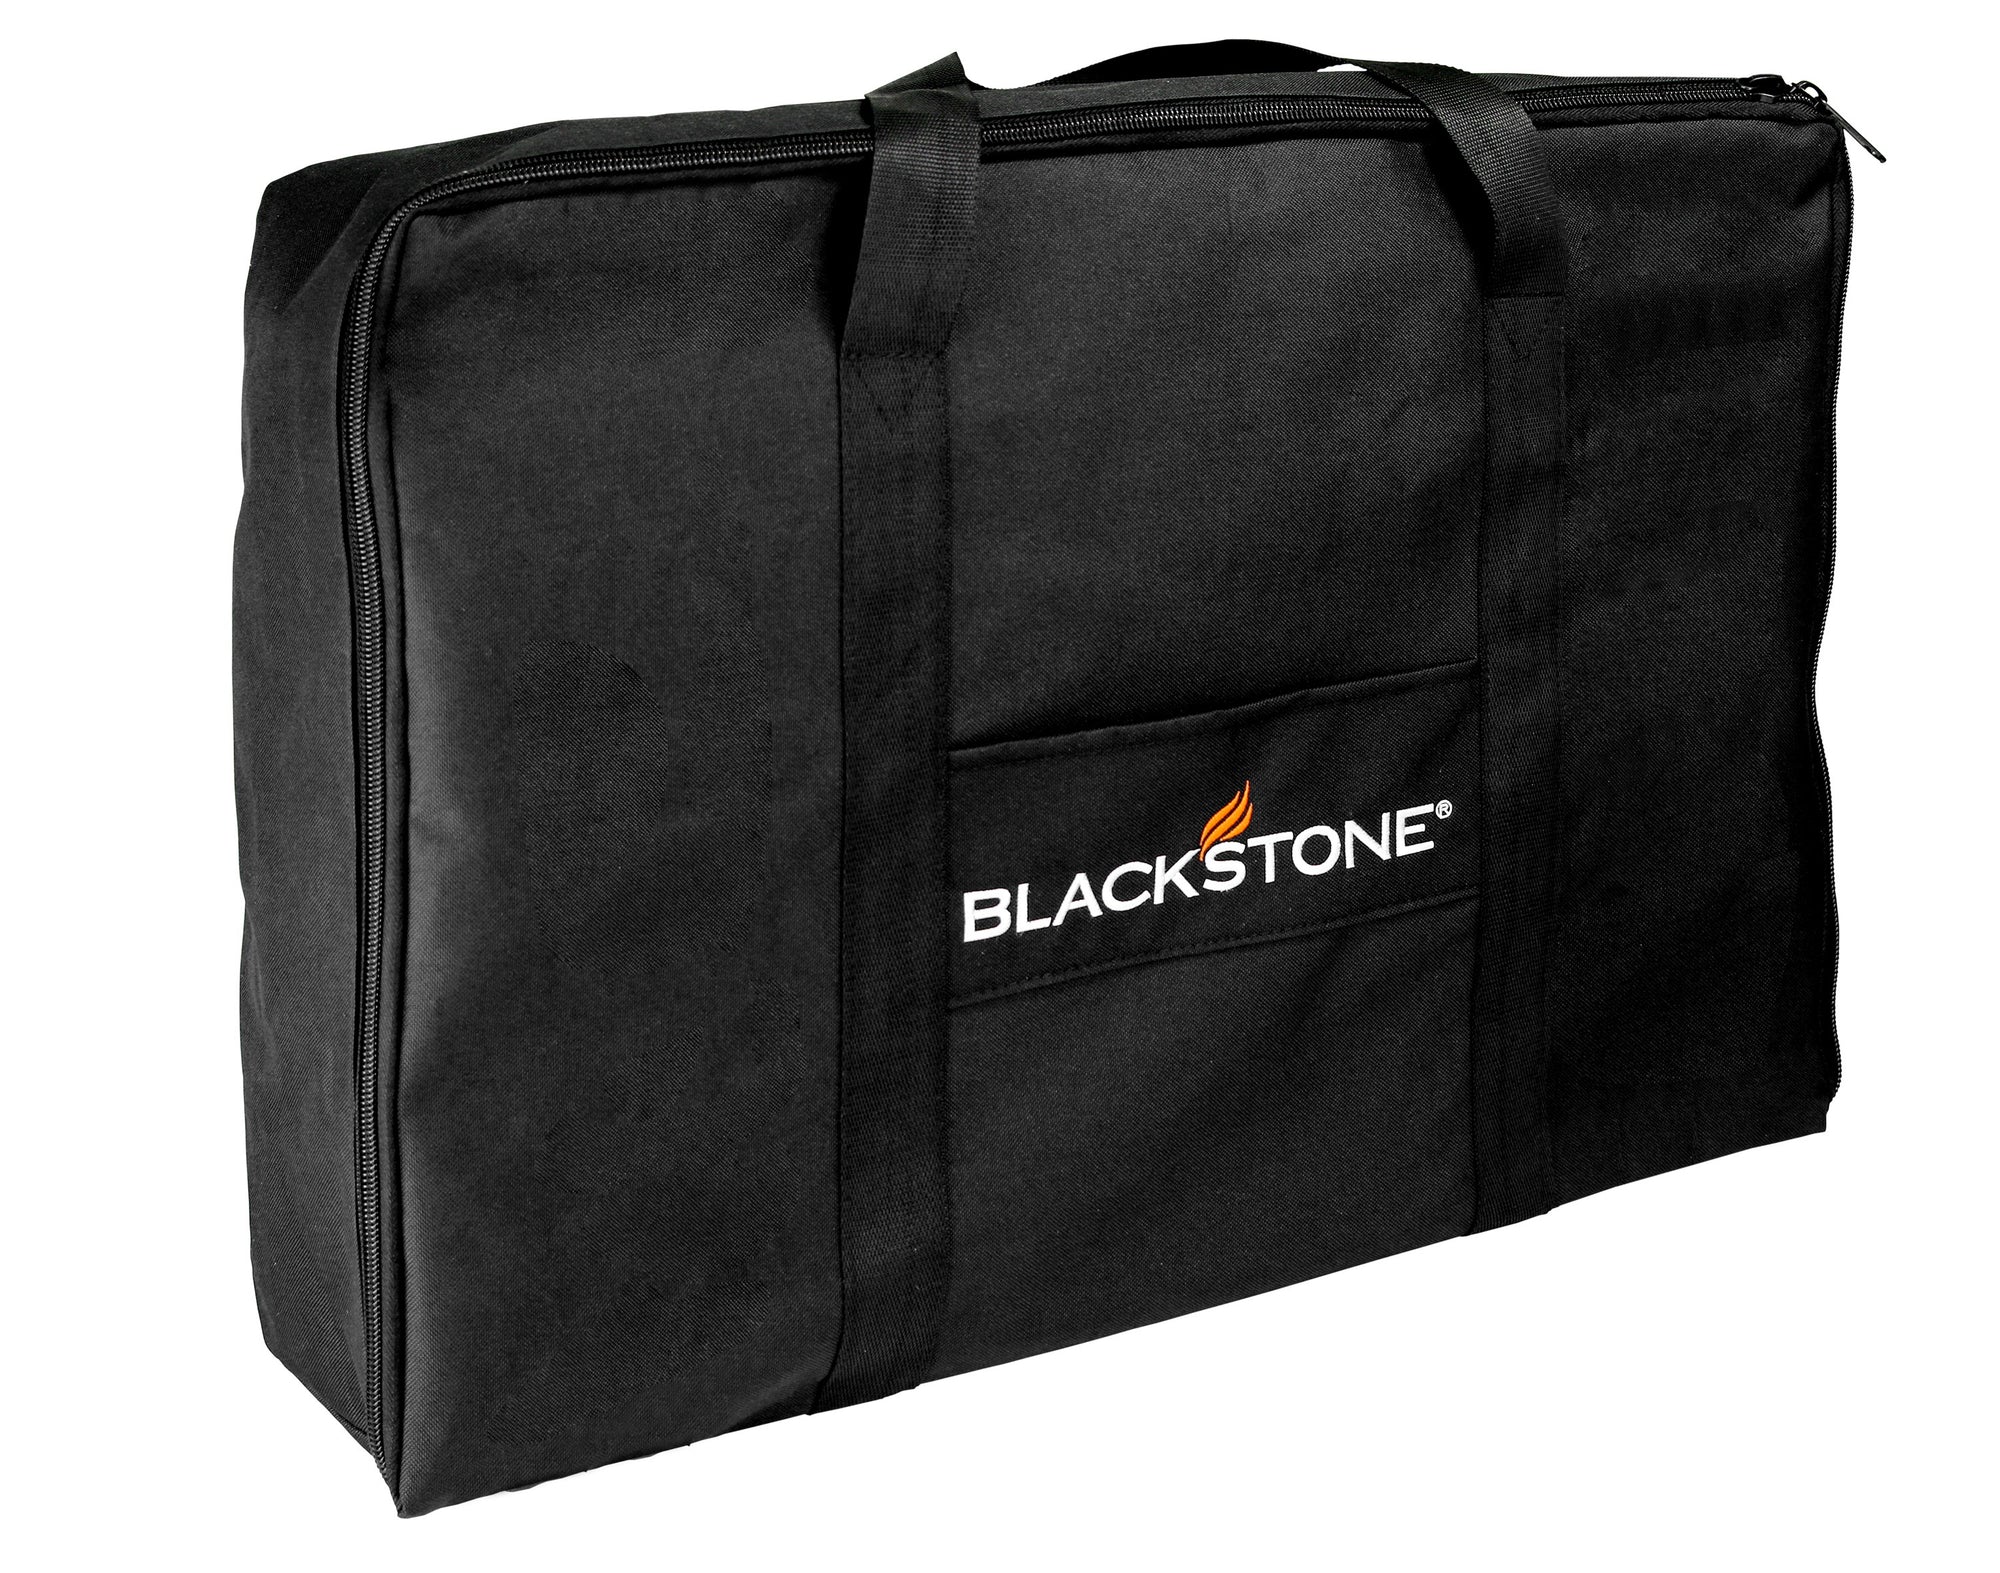 Blackstone 1722 Tabletop Griddle Cover and Carry Bag Set - 22"